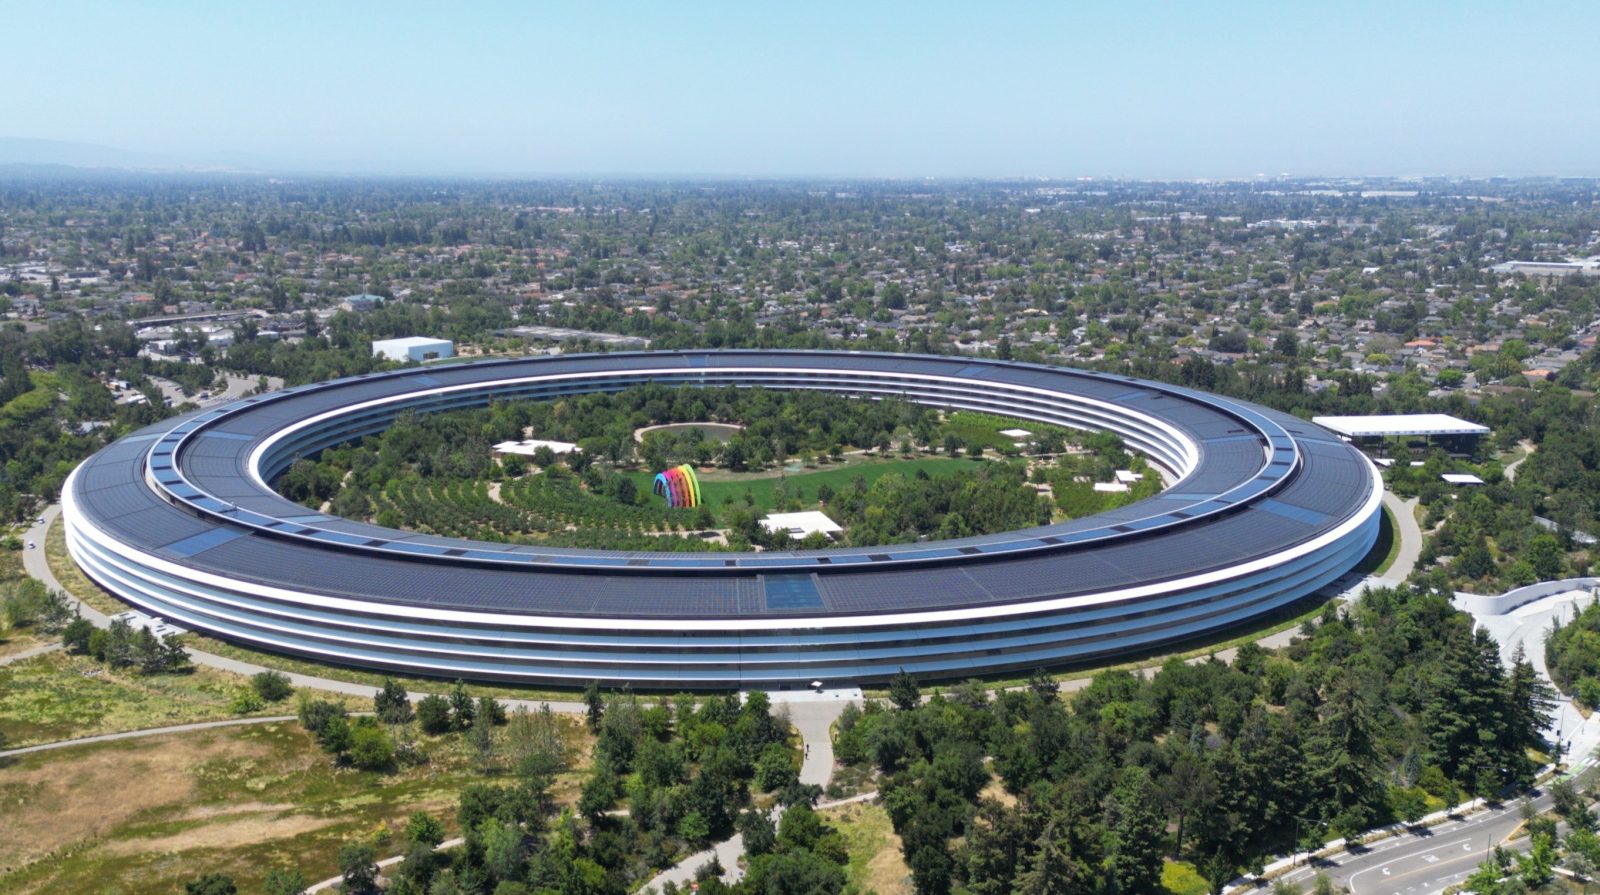 Pre wwdc apple park drone images show headset demo area new